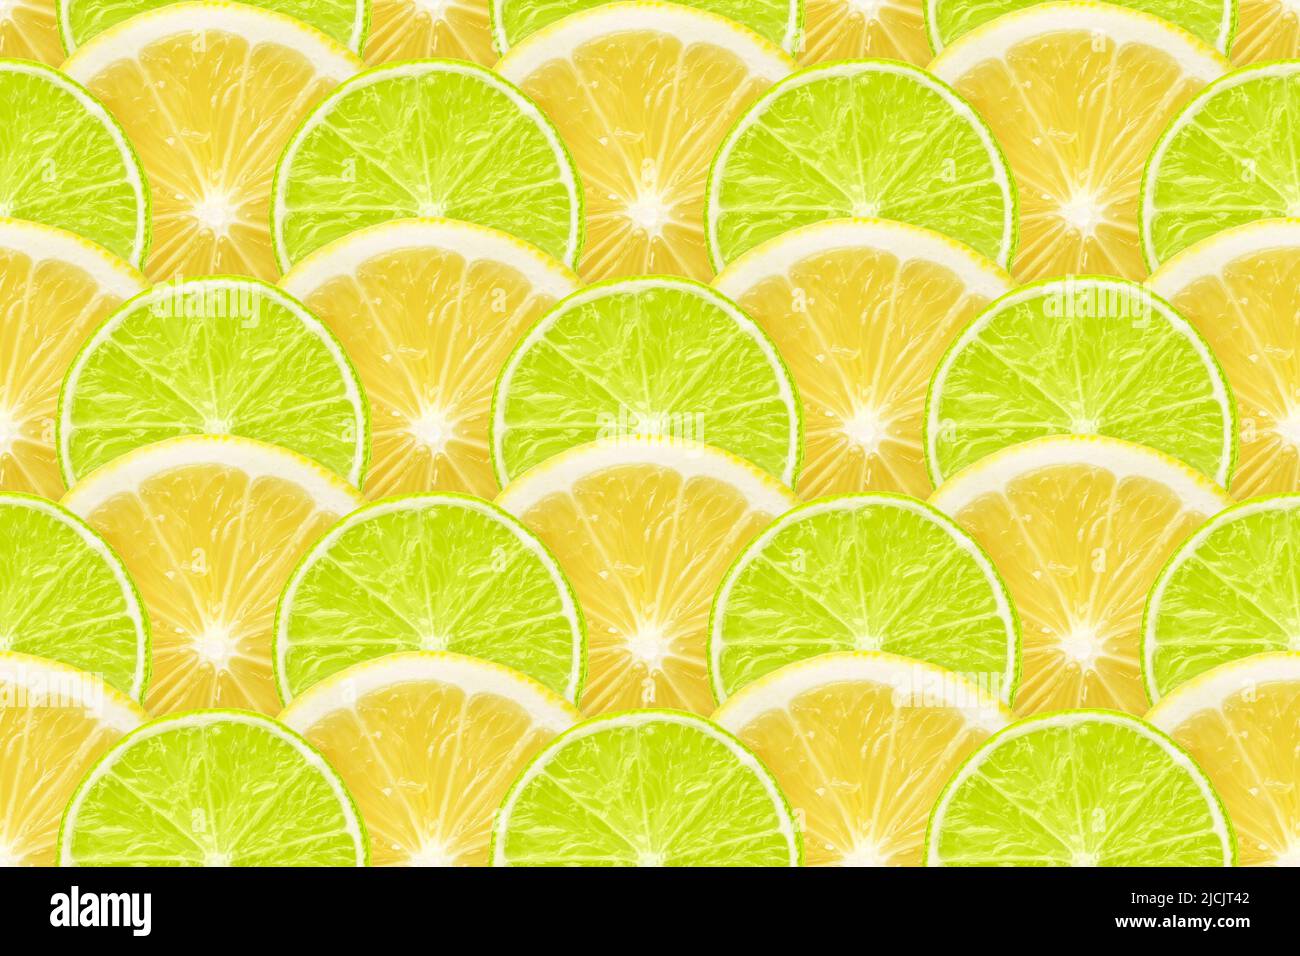 fresh seamless wave natural pattern made from many lemon and lime slices Stock Photo